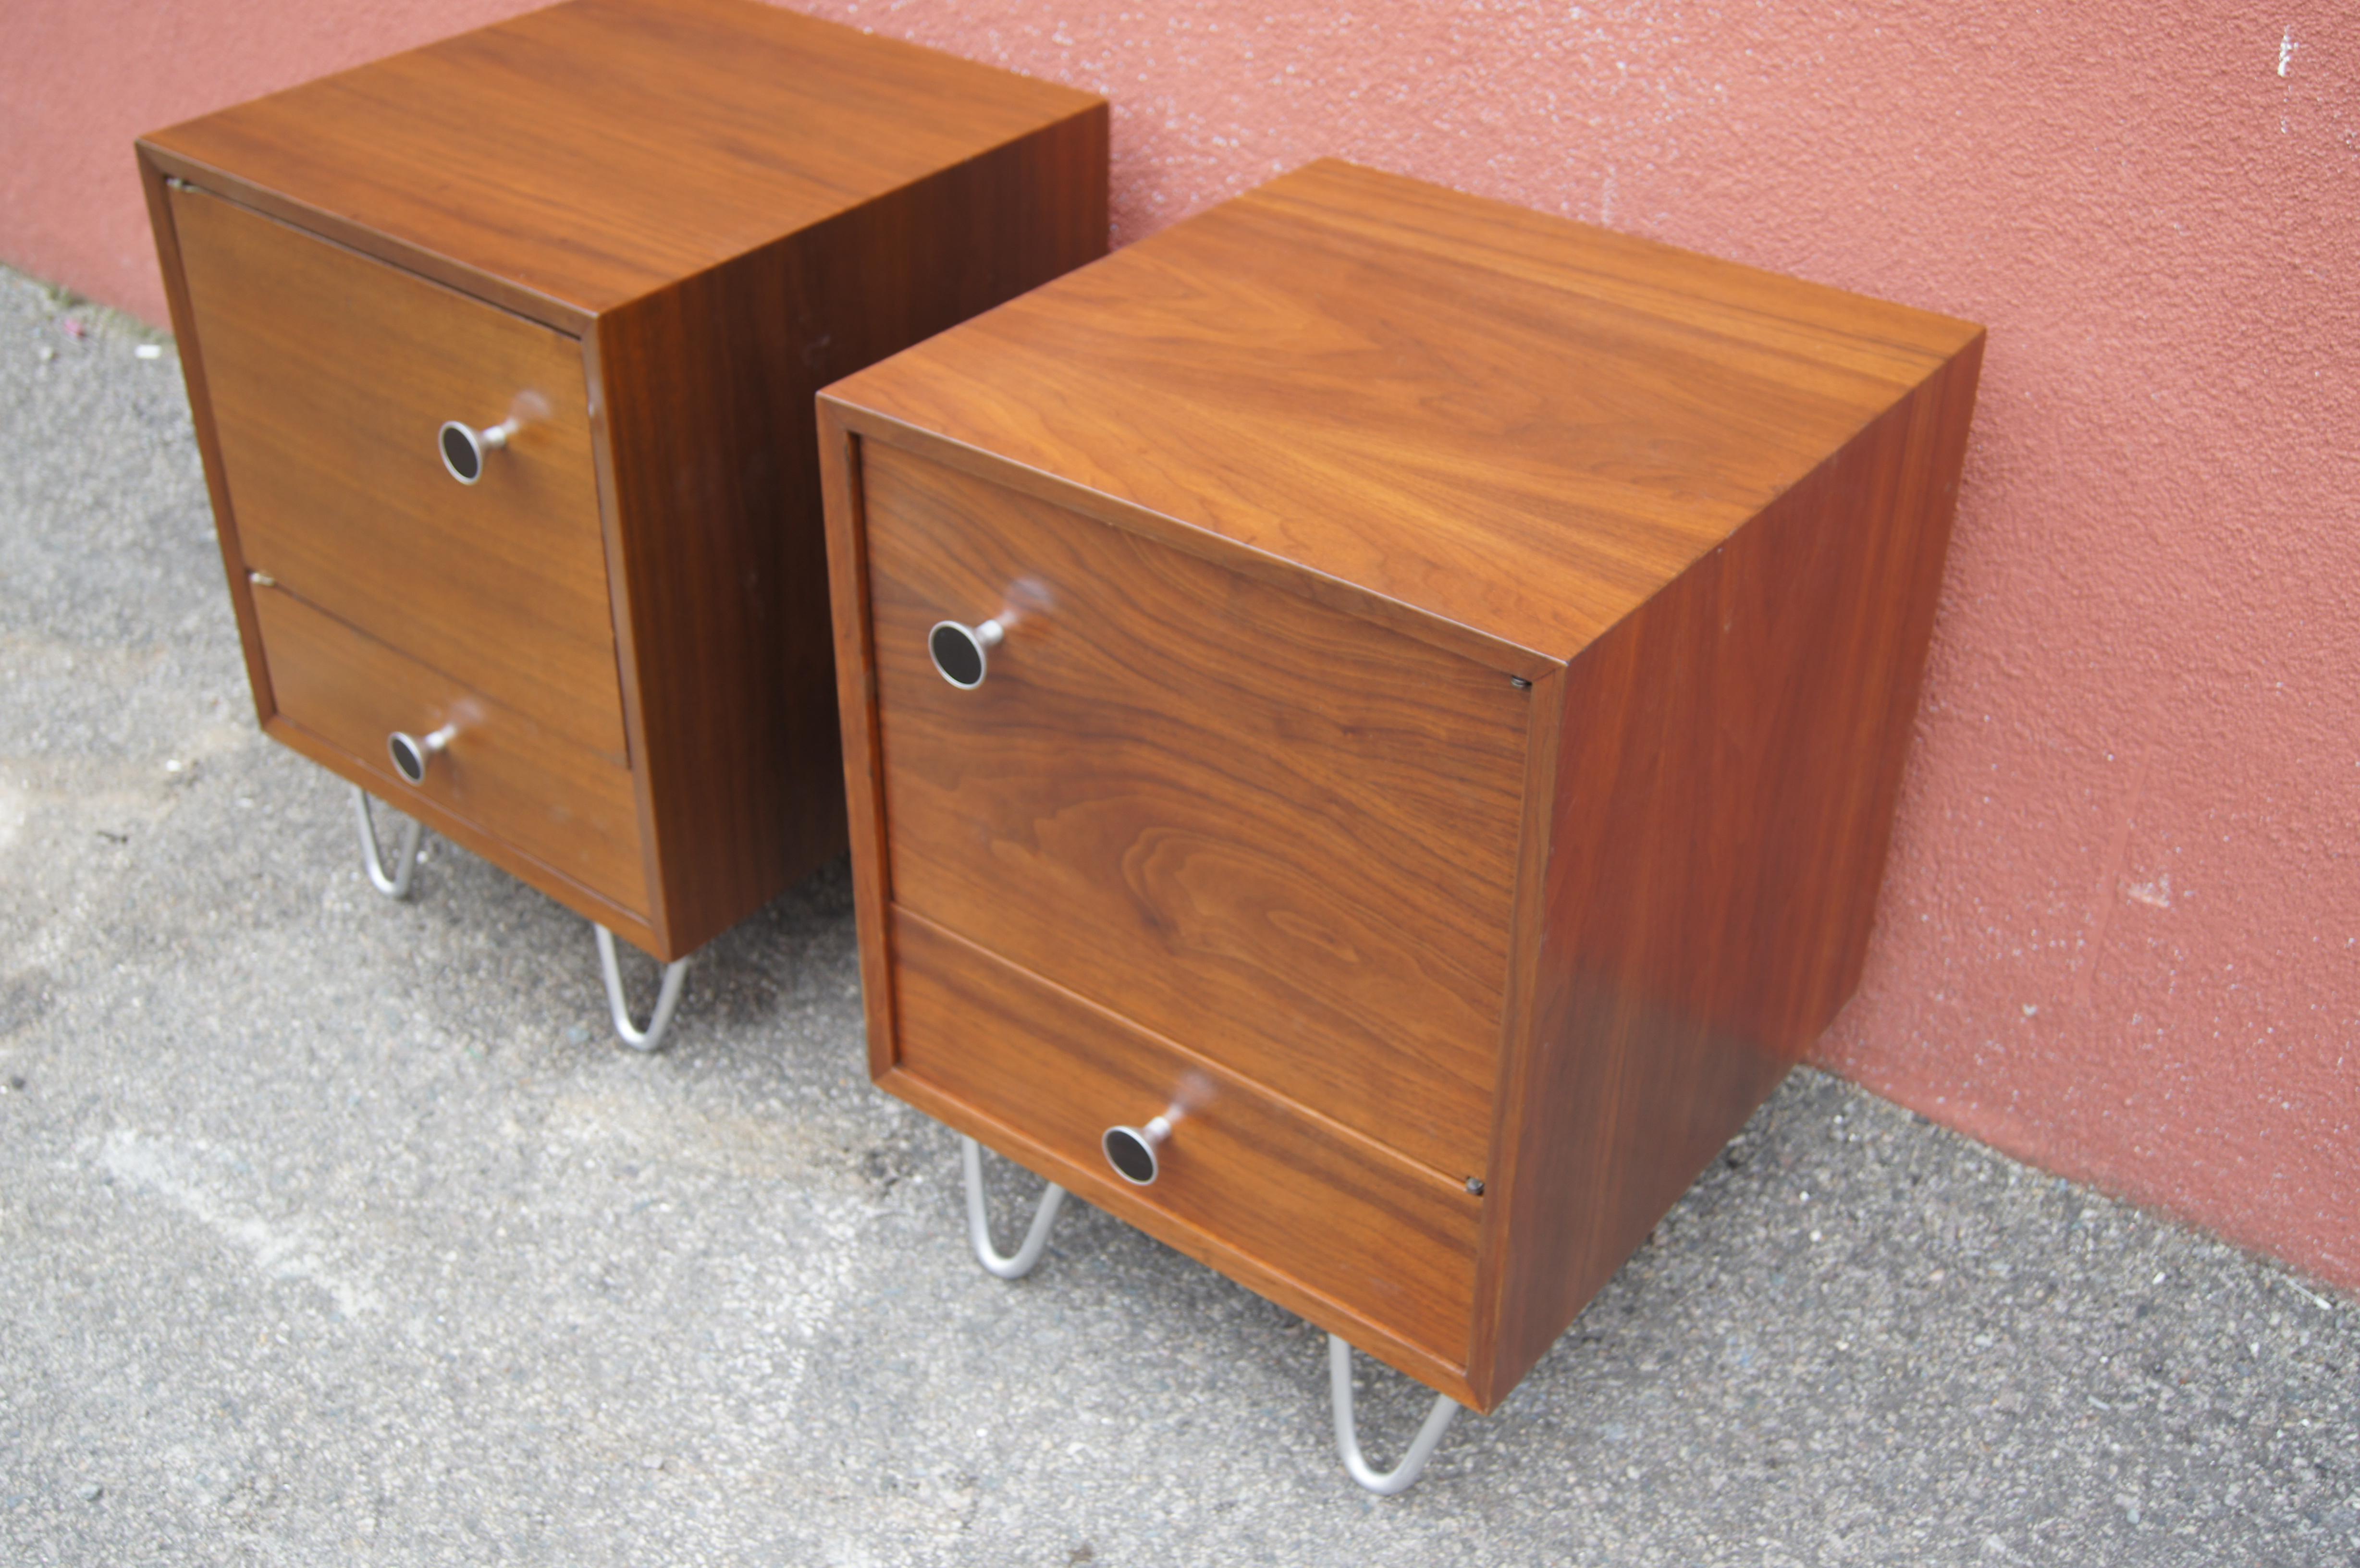 This pair of walnut nightstands, modeled after the designs of George Nelson for Herman Miller, were produced by Highlands Woodcraft of Massachusetts in the 1950s. Each cabinet door has two deep shelves and opens onto more storage space. Below is a